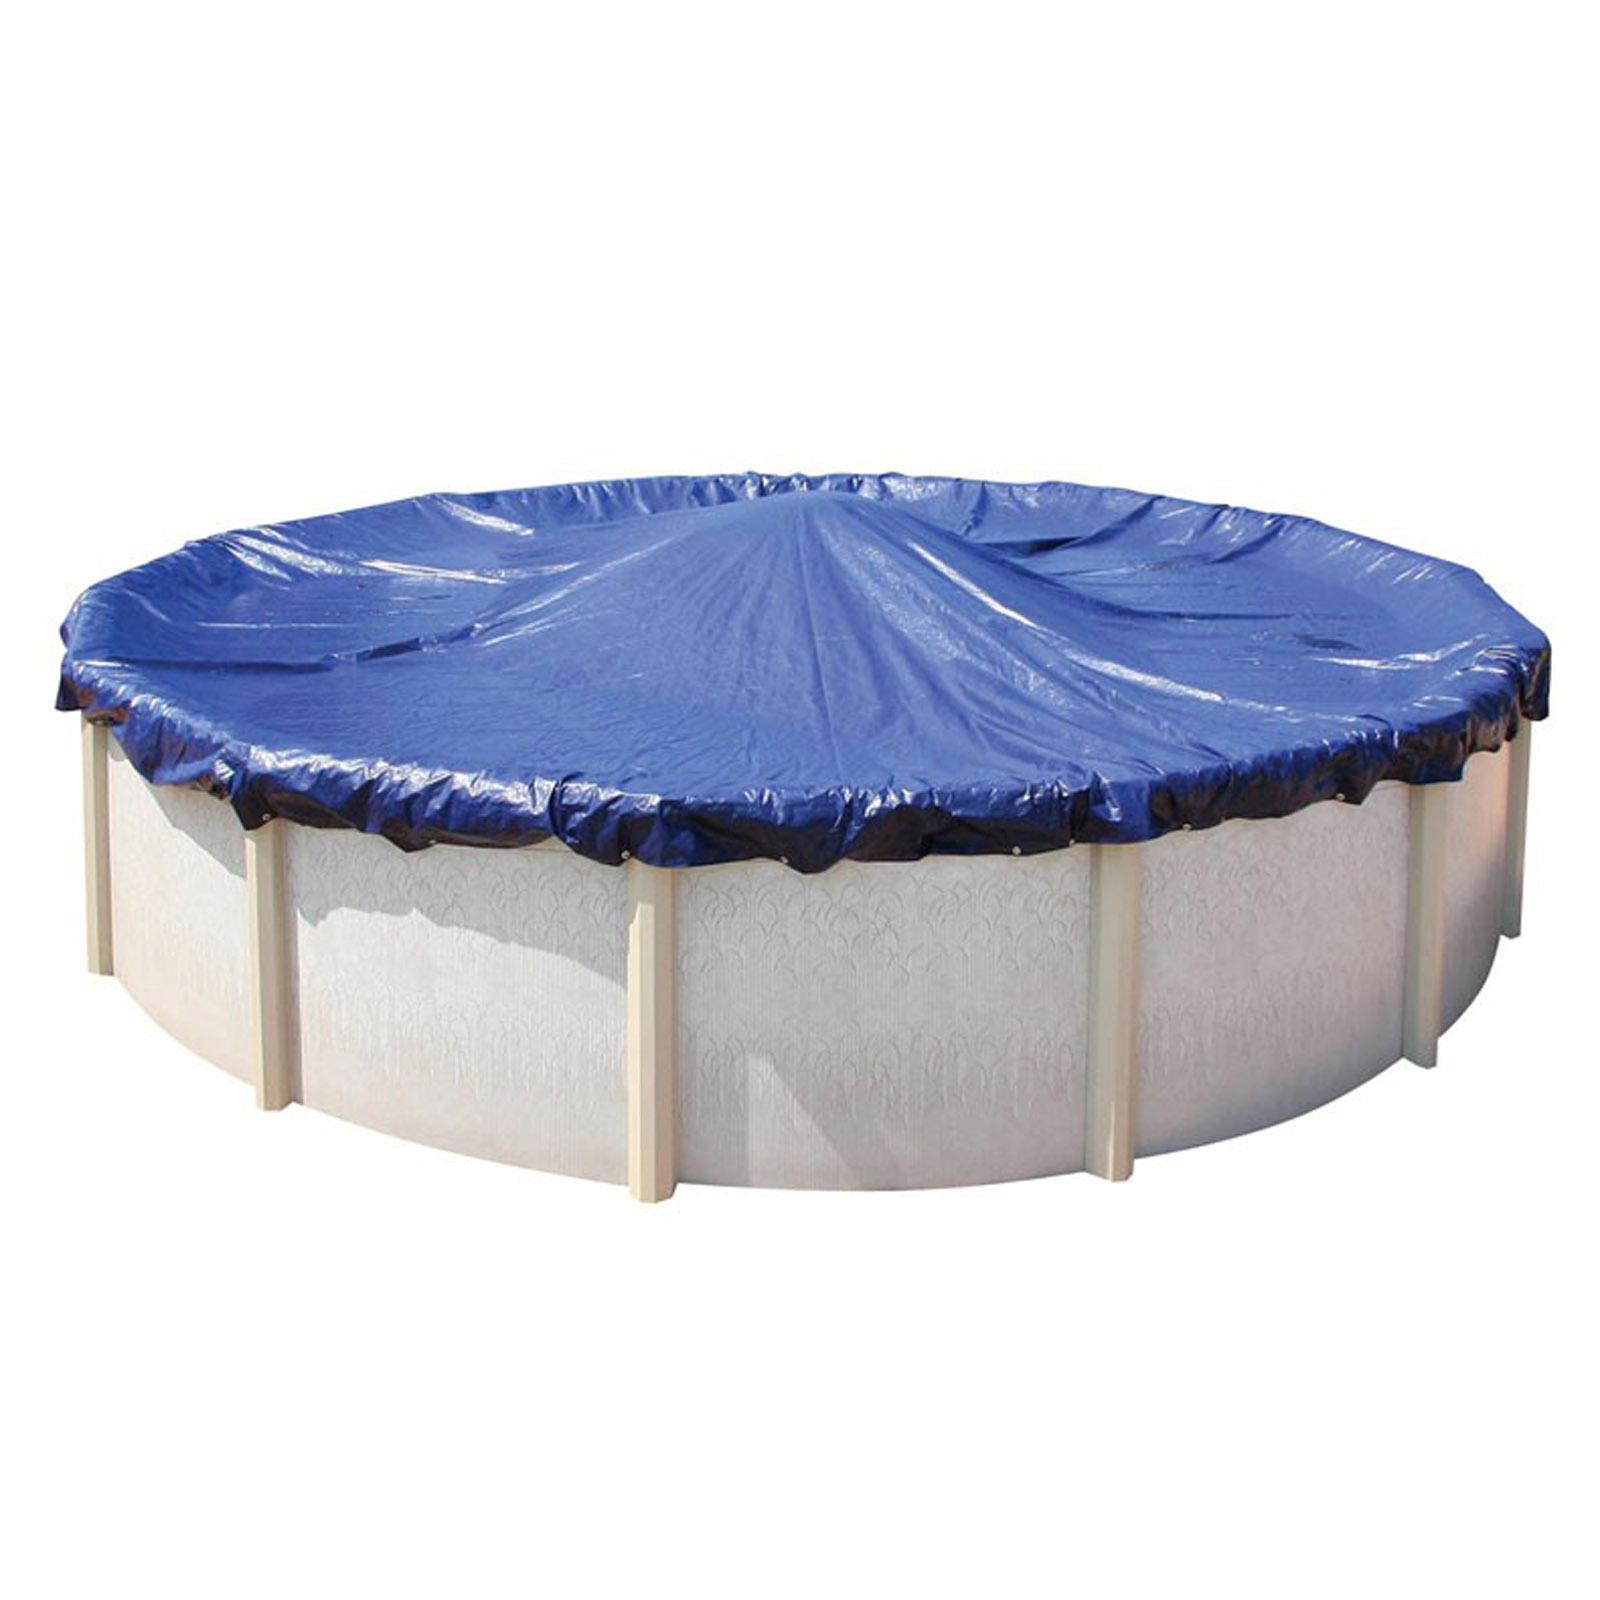 Durango Above Ground Pool Cover 12x12 Weave 24 ft. round Shop Your Way Online Shopping